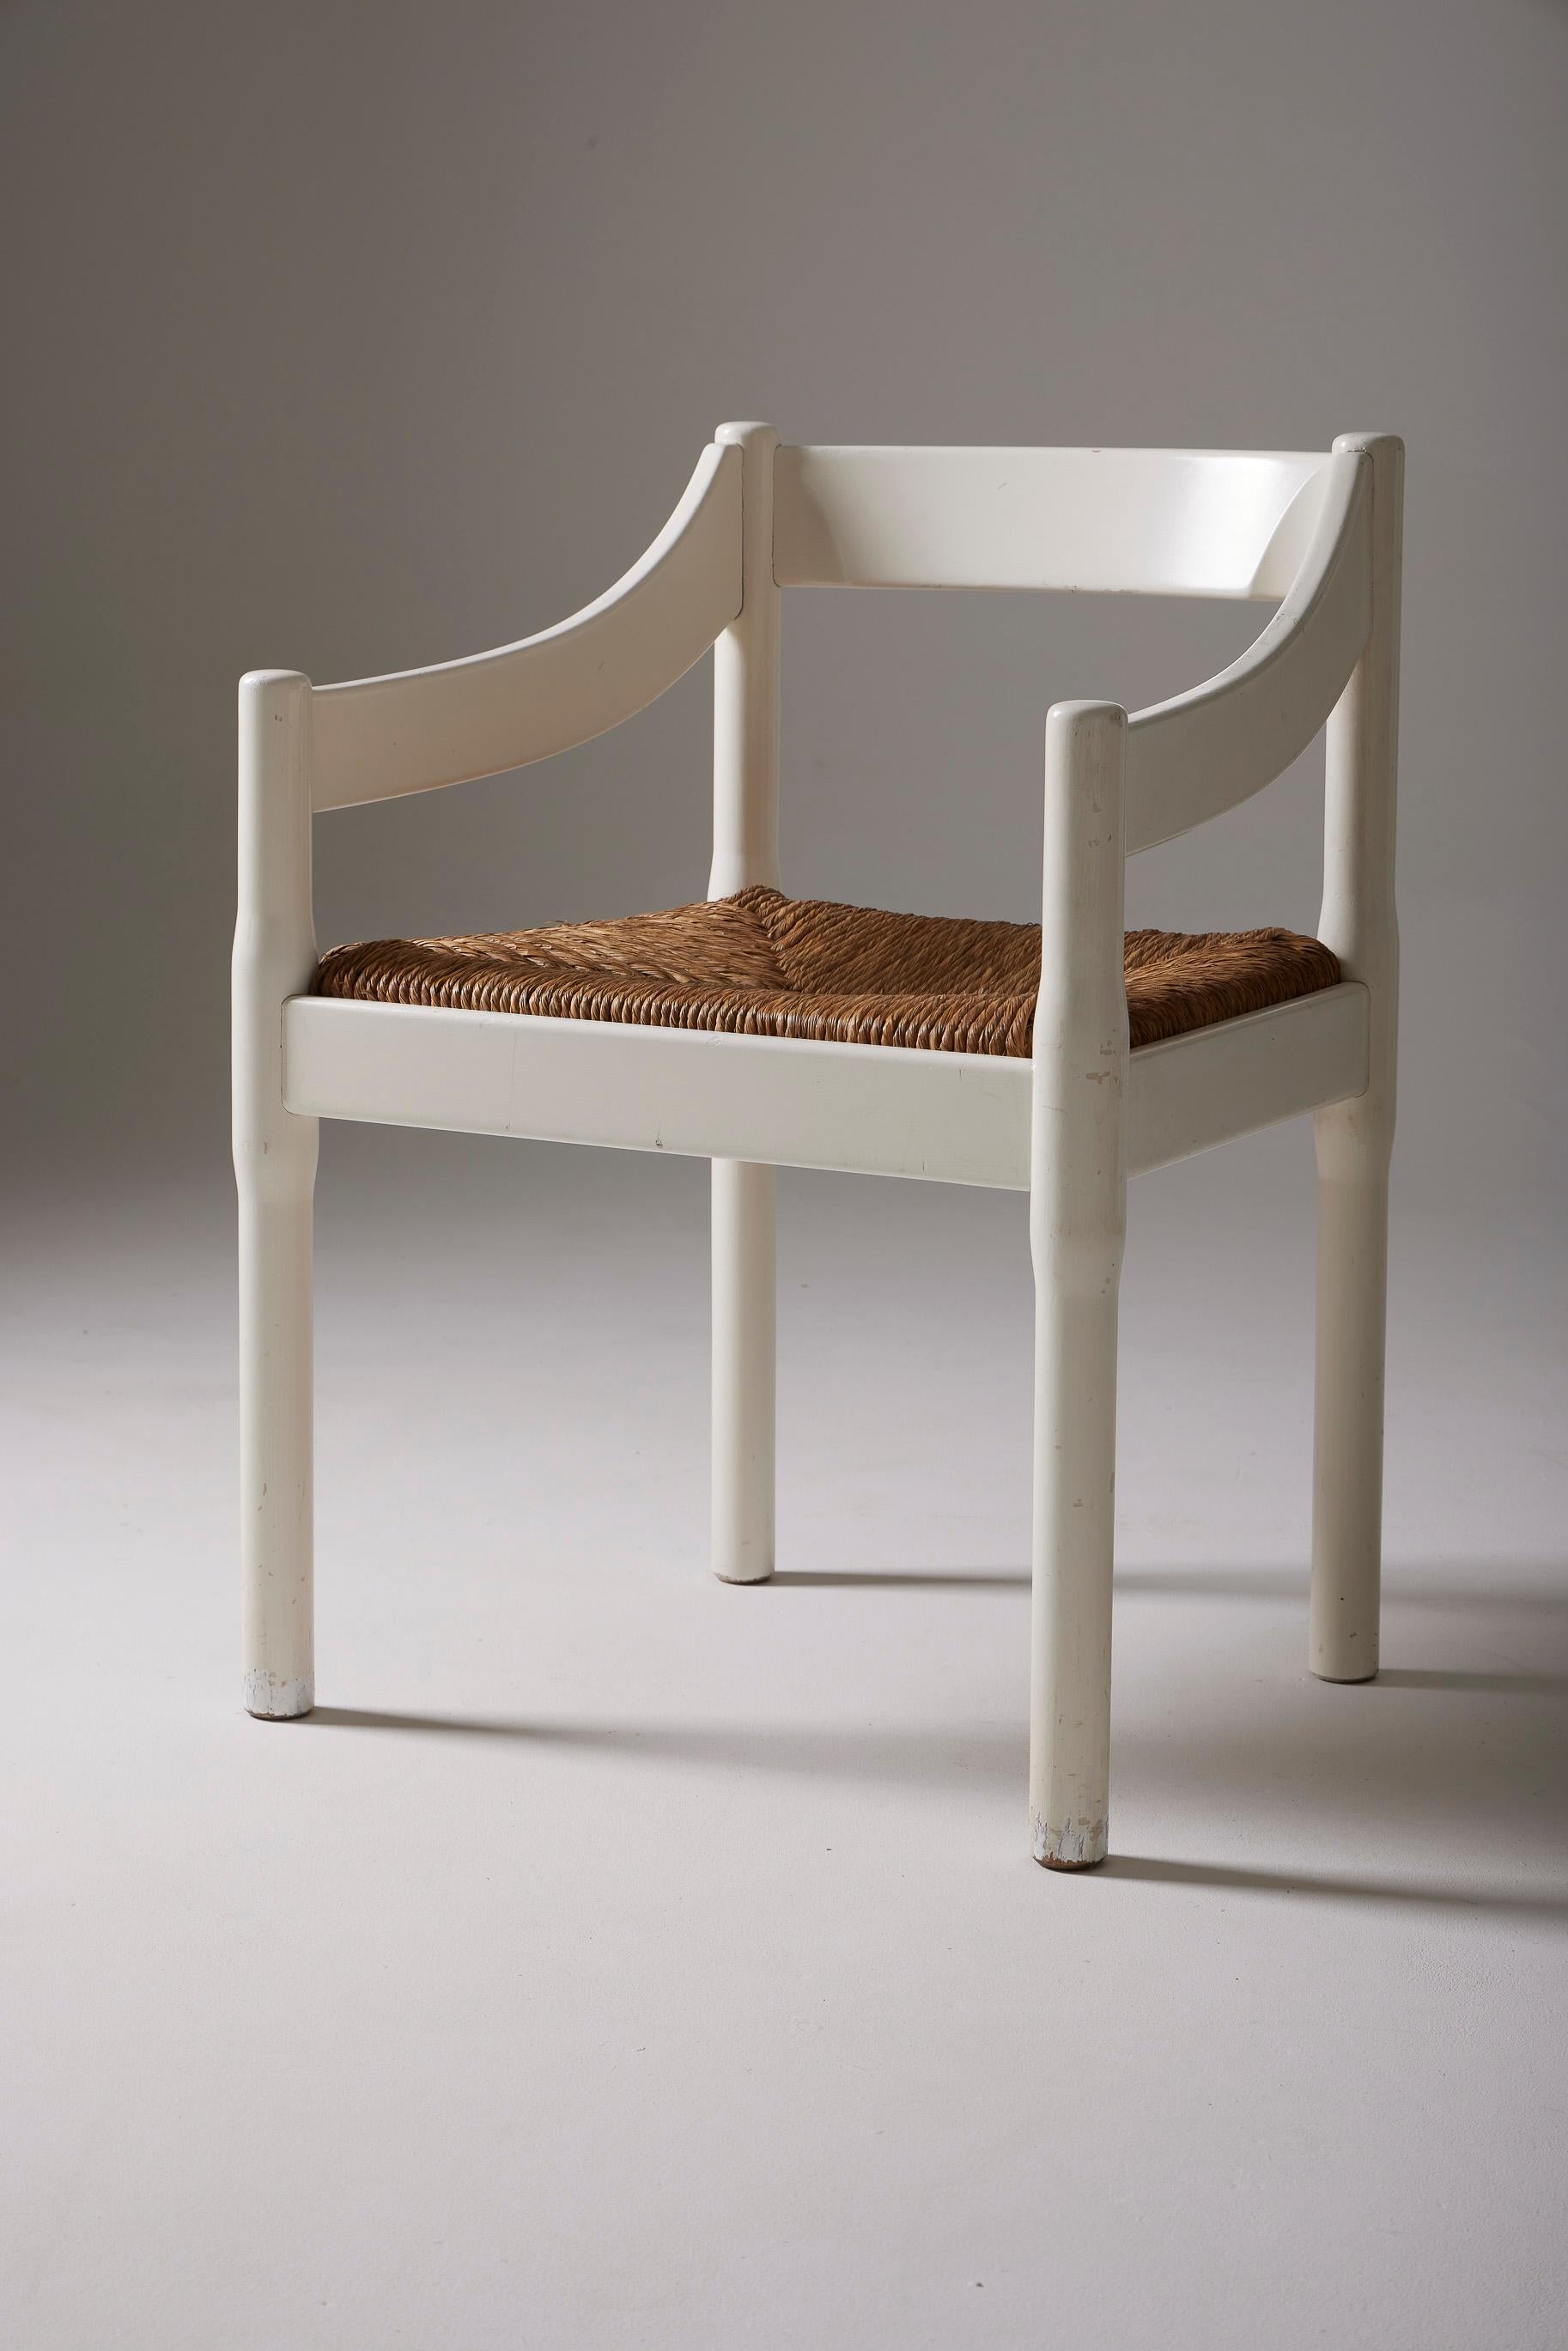 Carimate chair model by the great Italian designer Vico Magistretti in the late 1950s (1959). The chair structure is in white lacquered wood and the seat is in straw. Discreet signs of use adorn the furniture, bearing witness to its lived history,